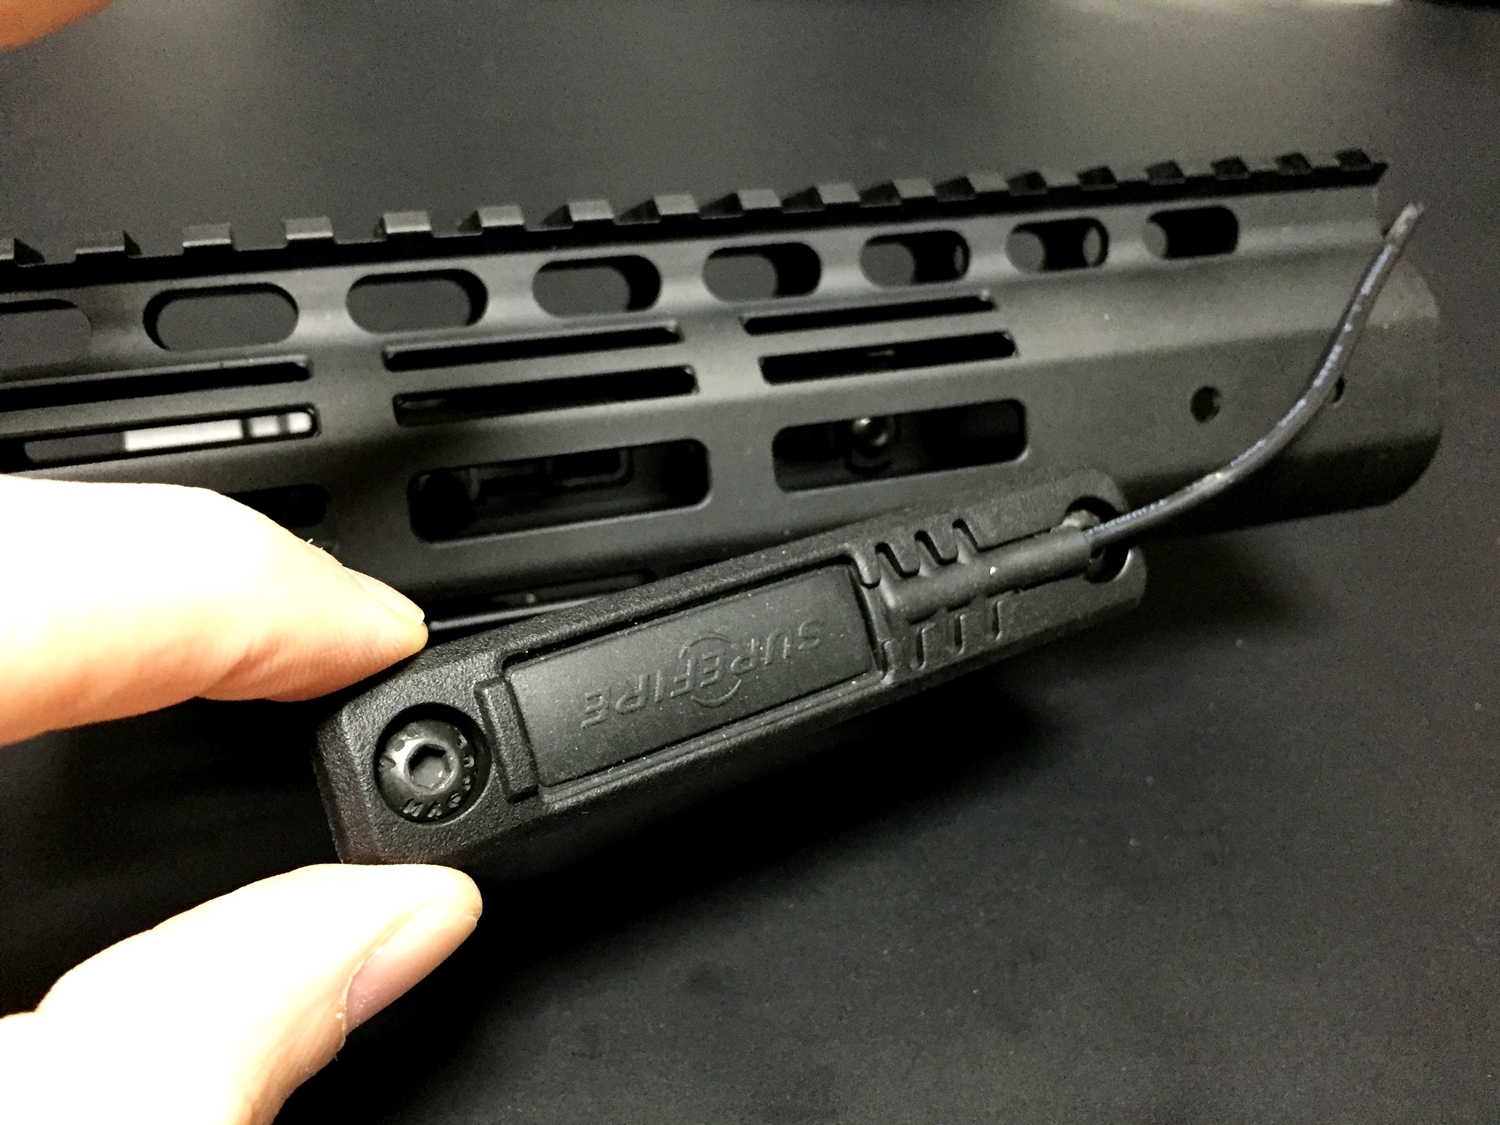 19 M-LOK MAGPUL Tape Switch Mounting Plate for Surefire ST Polymer MADE IN USA マグプル 実物 本家 テープ リモート スイッチ